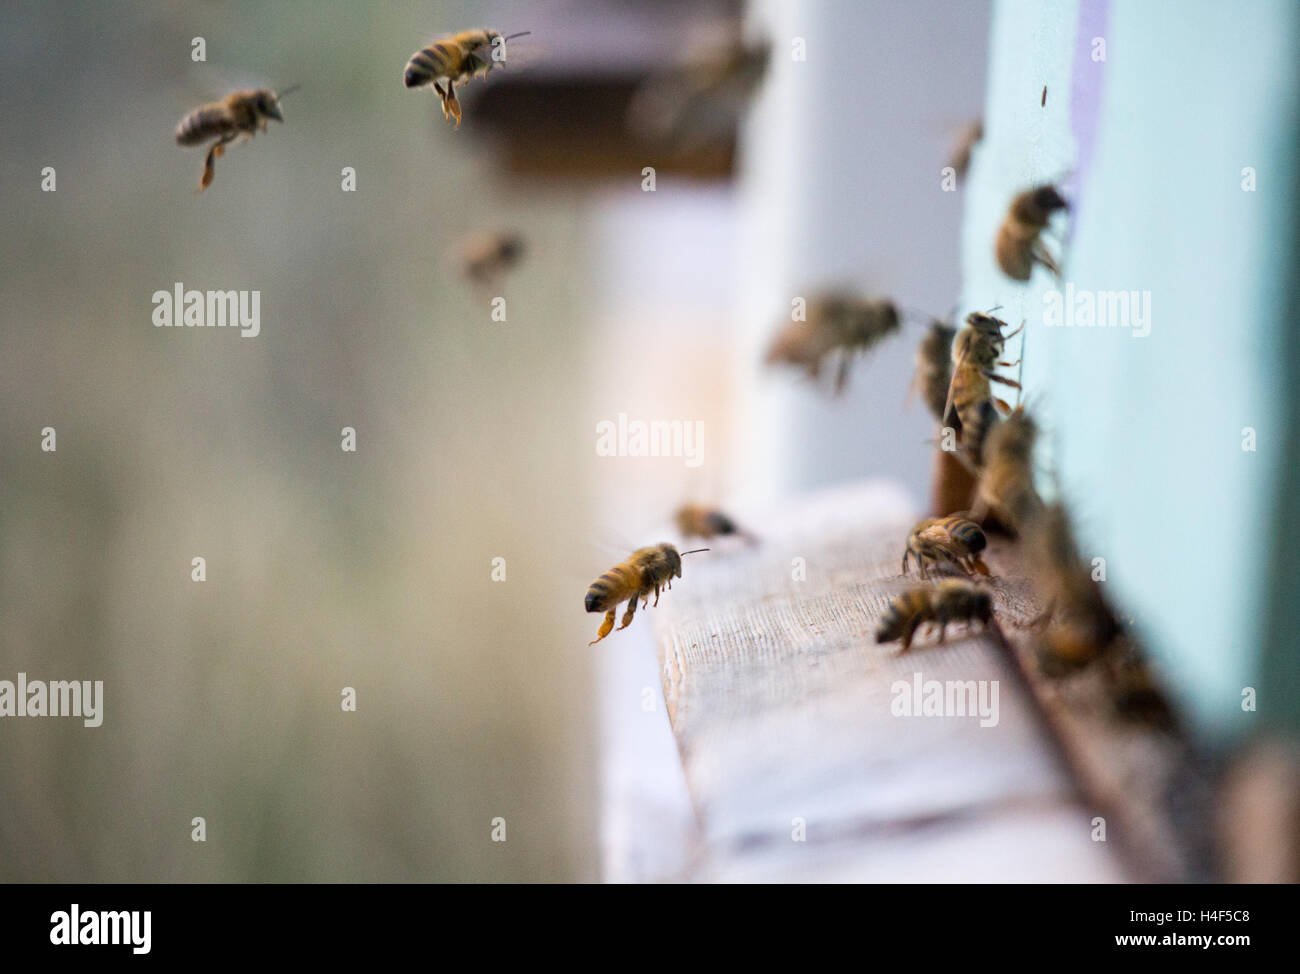 Bees flying in and on their hive, nature inspiration, Vancouver Island Stock Photo